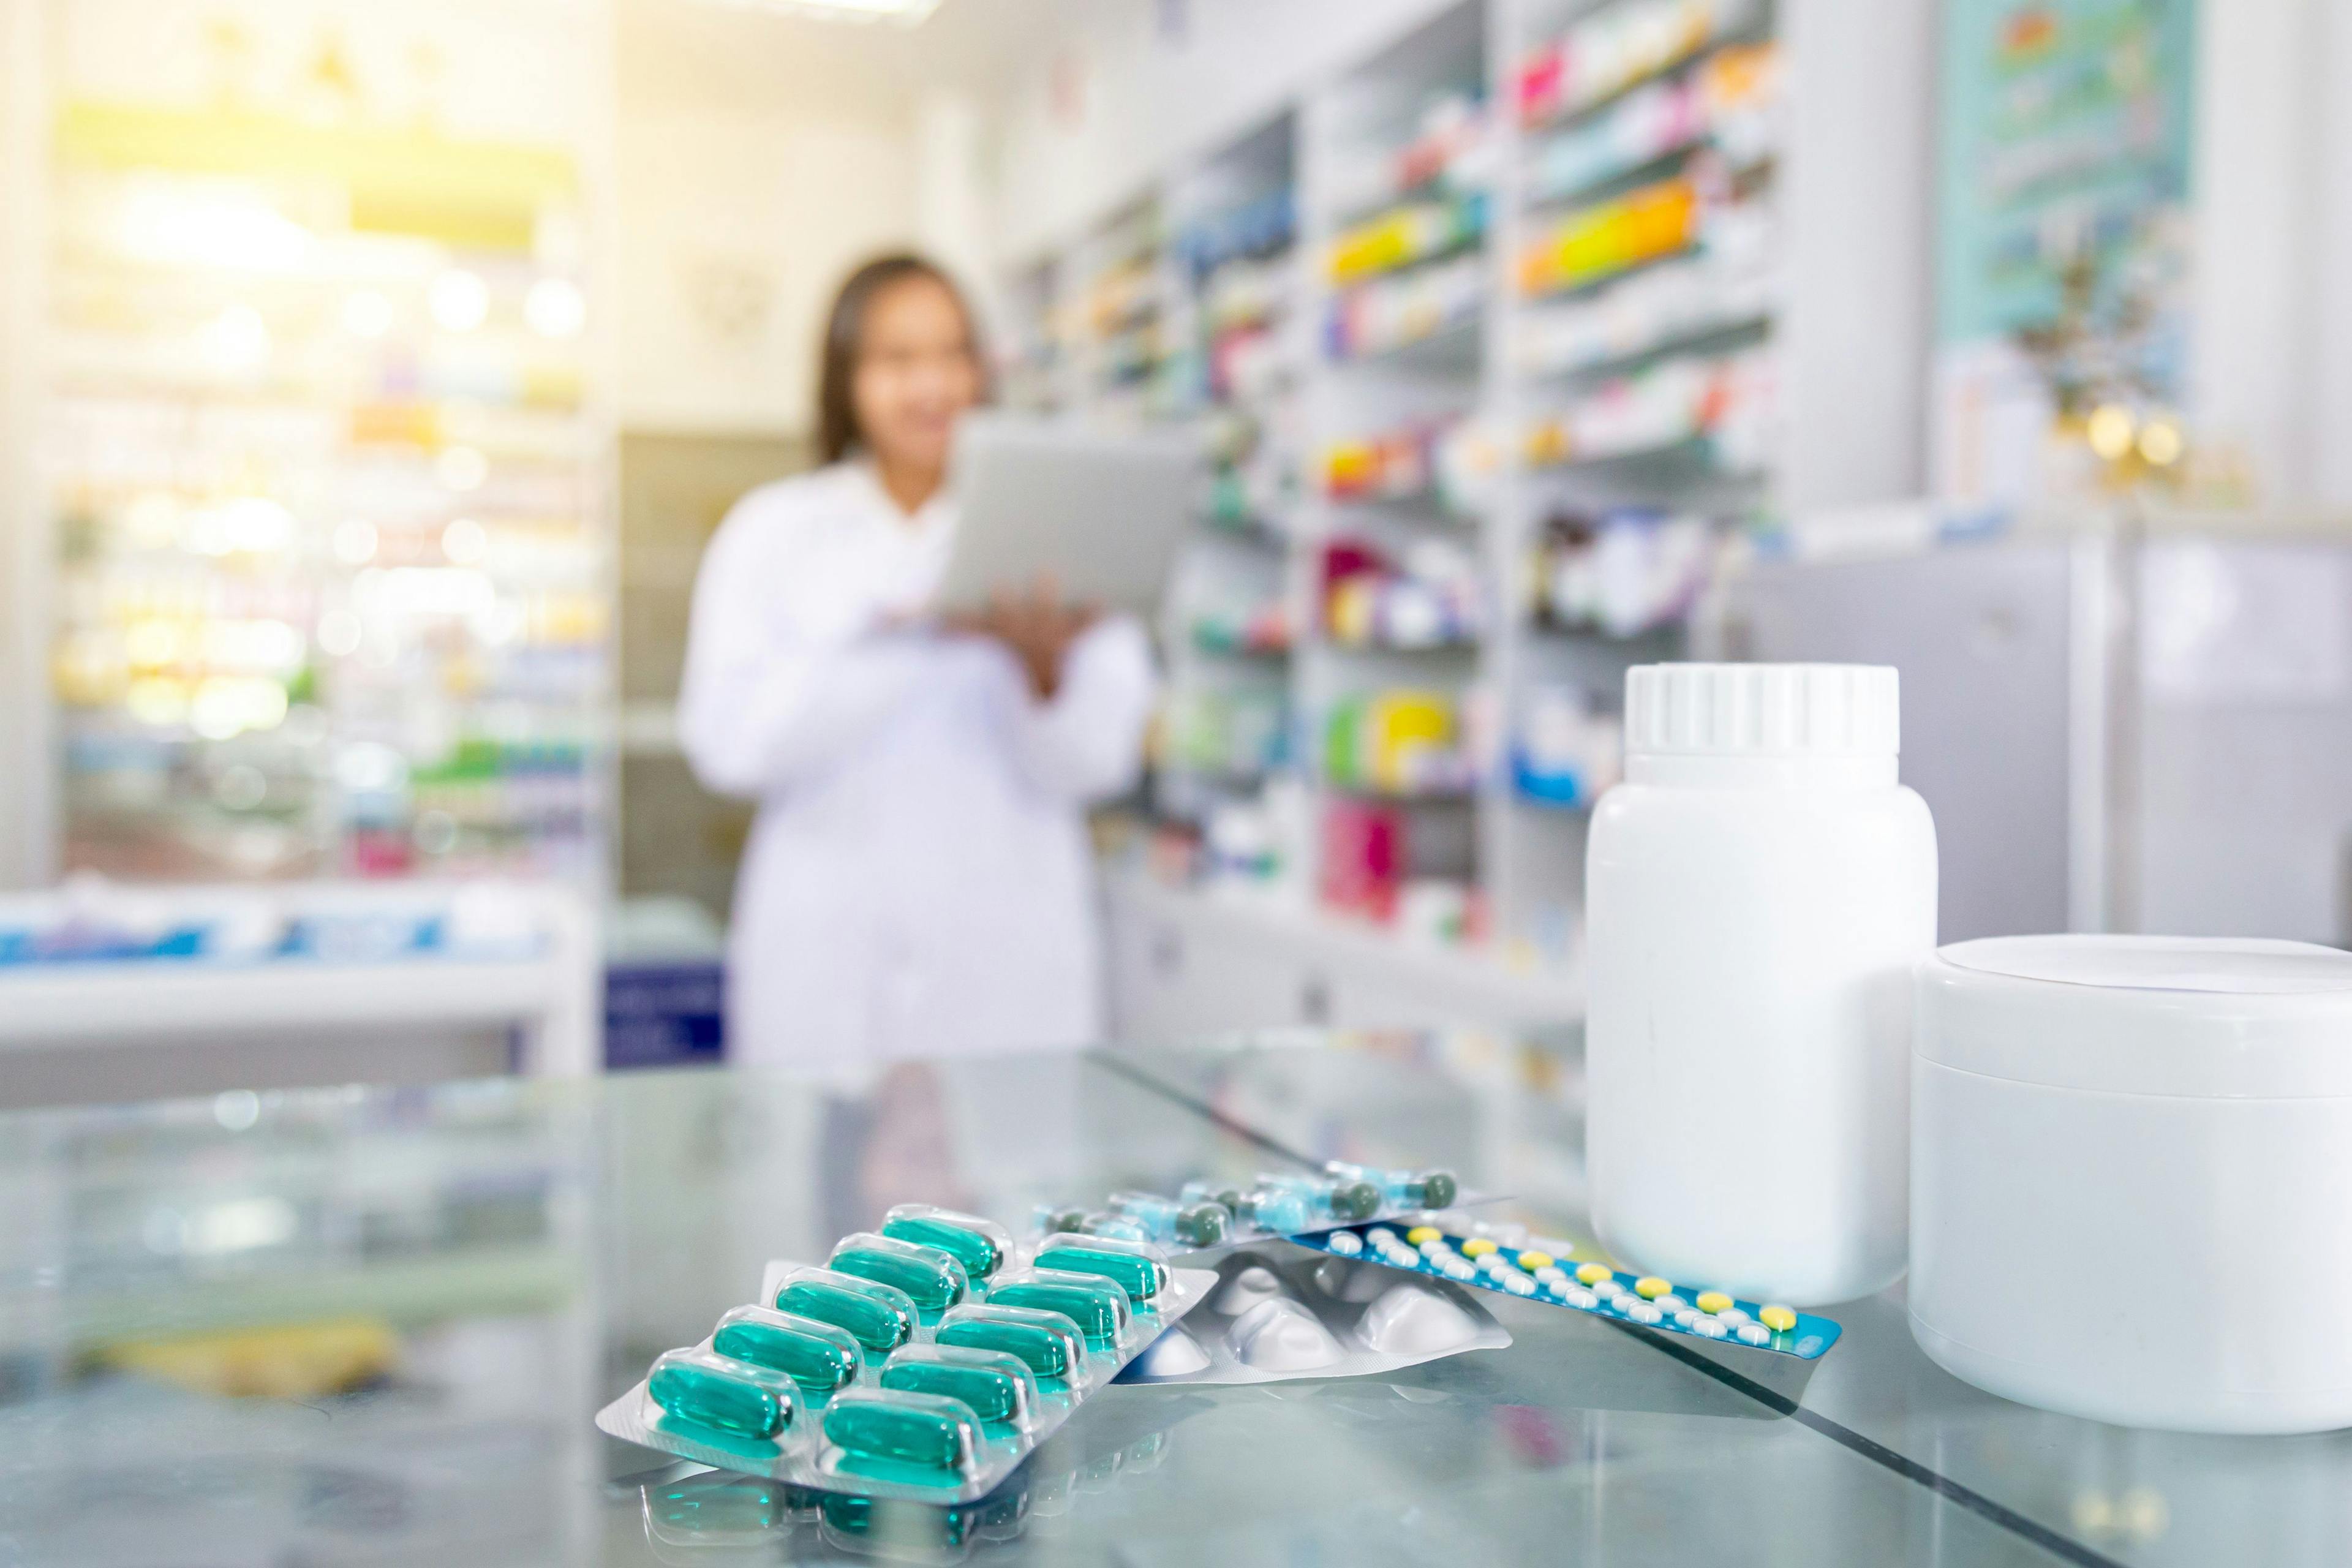 Pharmacy Staffing Shortages Lead to Disruptions in Patient Care